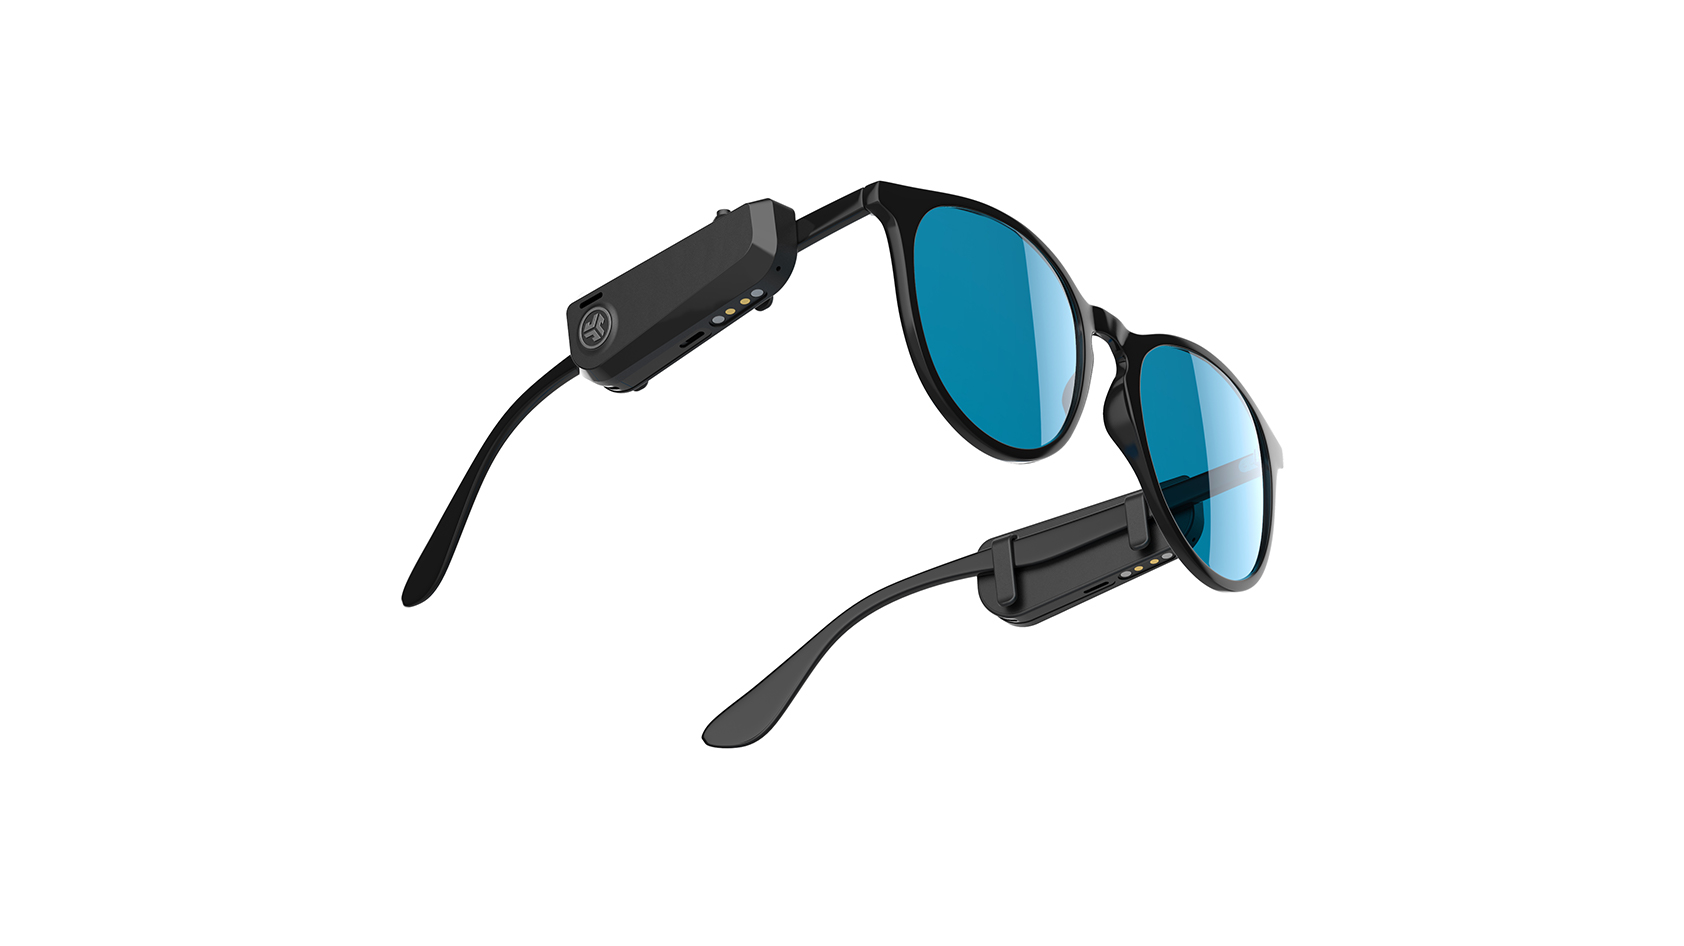 The Jlab Jbuds Frames sunglasses with blue lenses against a white background.